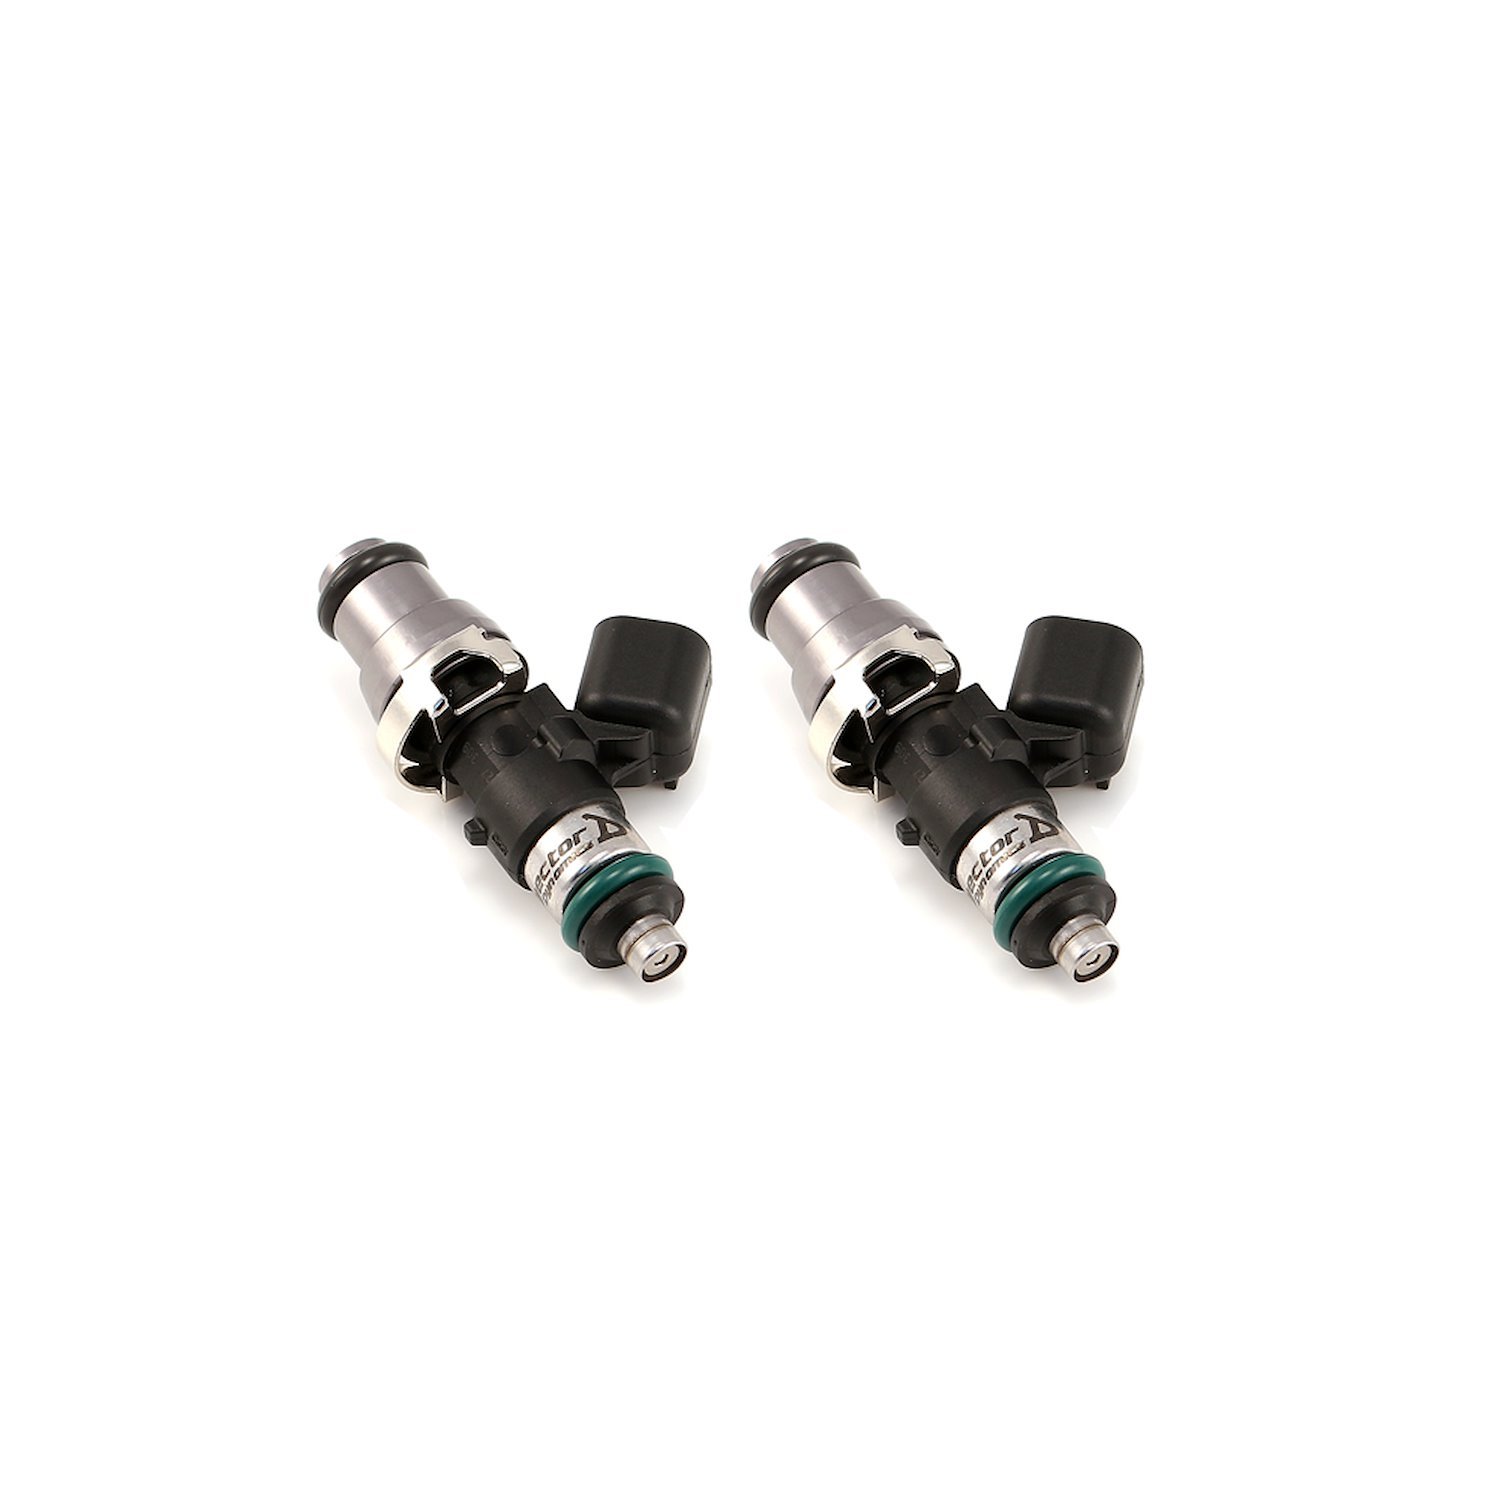 1050.48.14.14.2 1050cc Fuel Injector Set, 48 mm Length, 14 mm (Grey) Adaptor Top, 14 mm Lower O-Ring